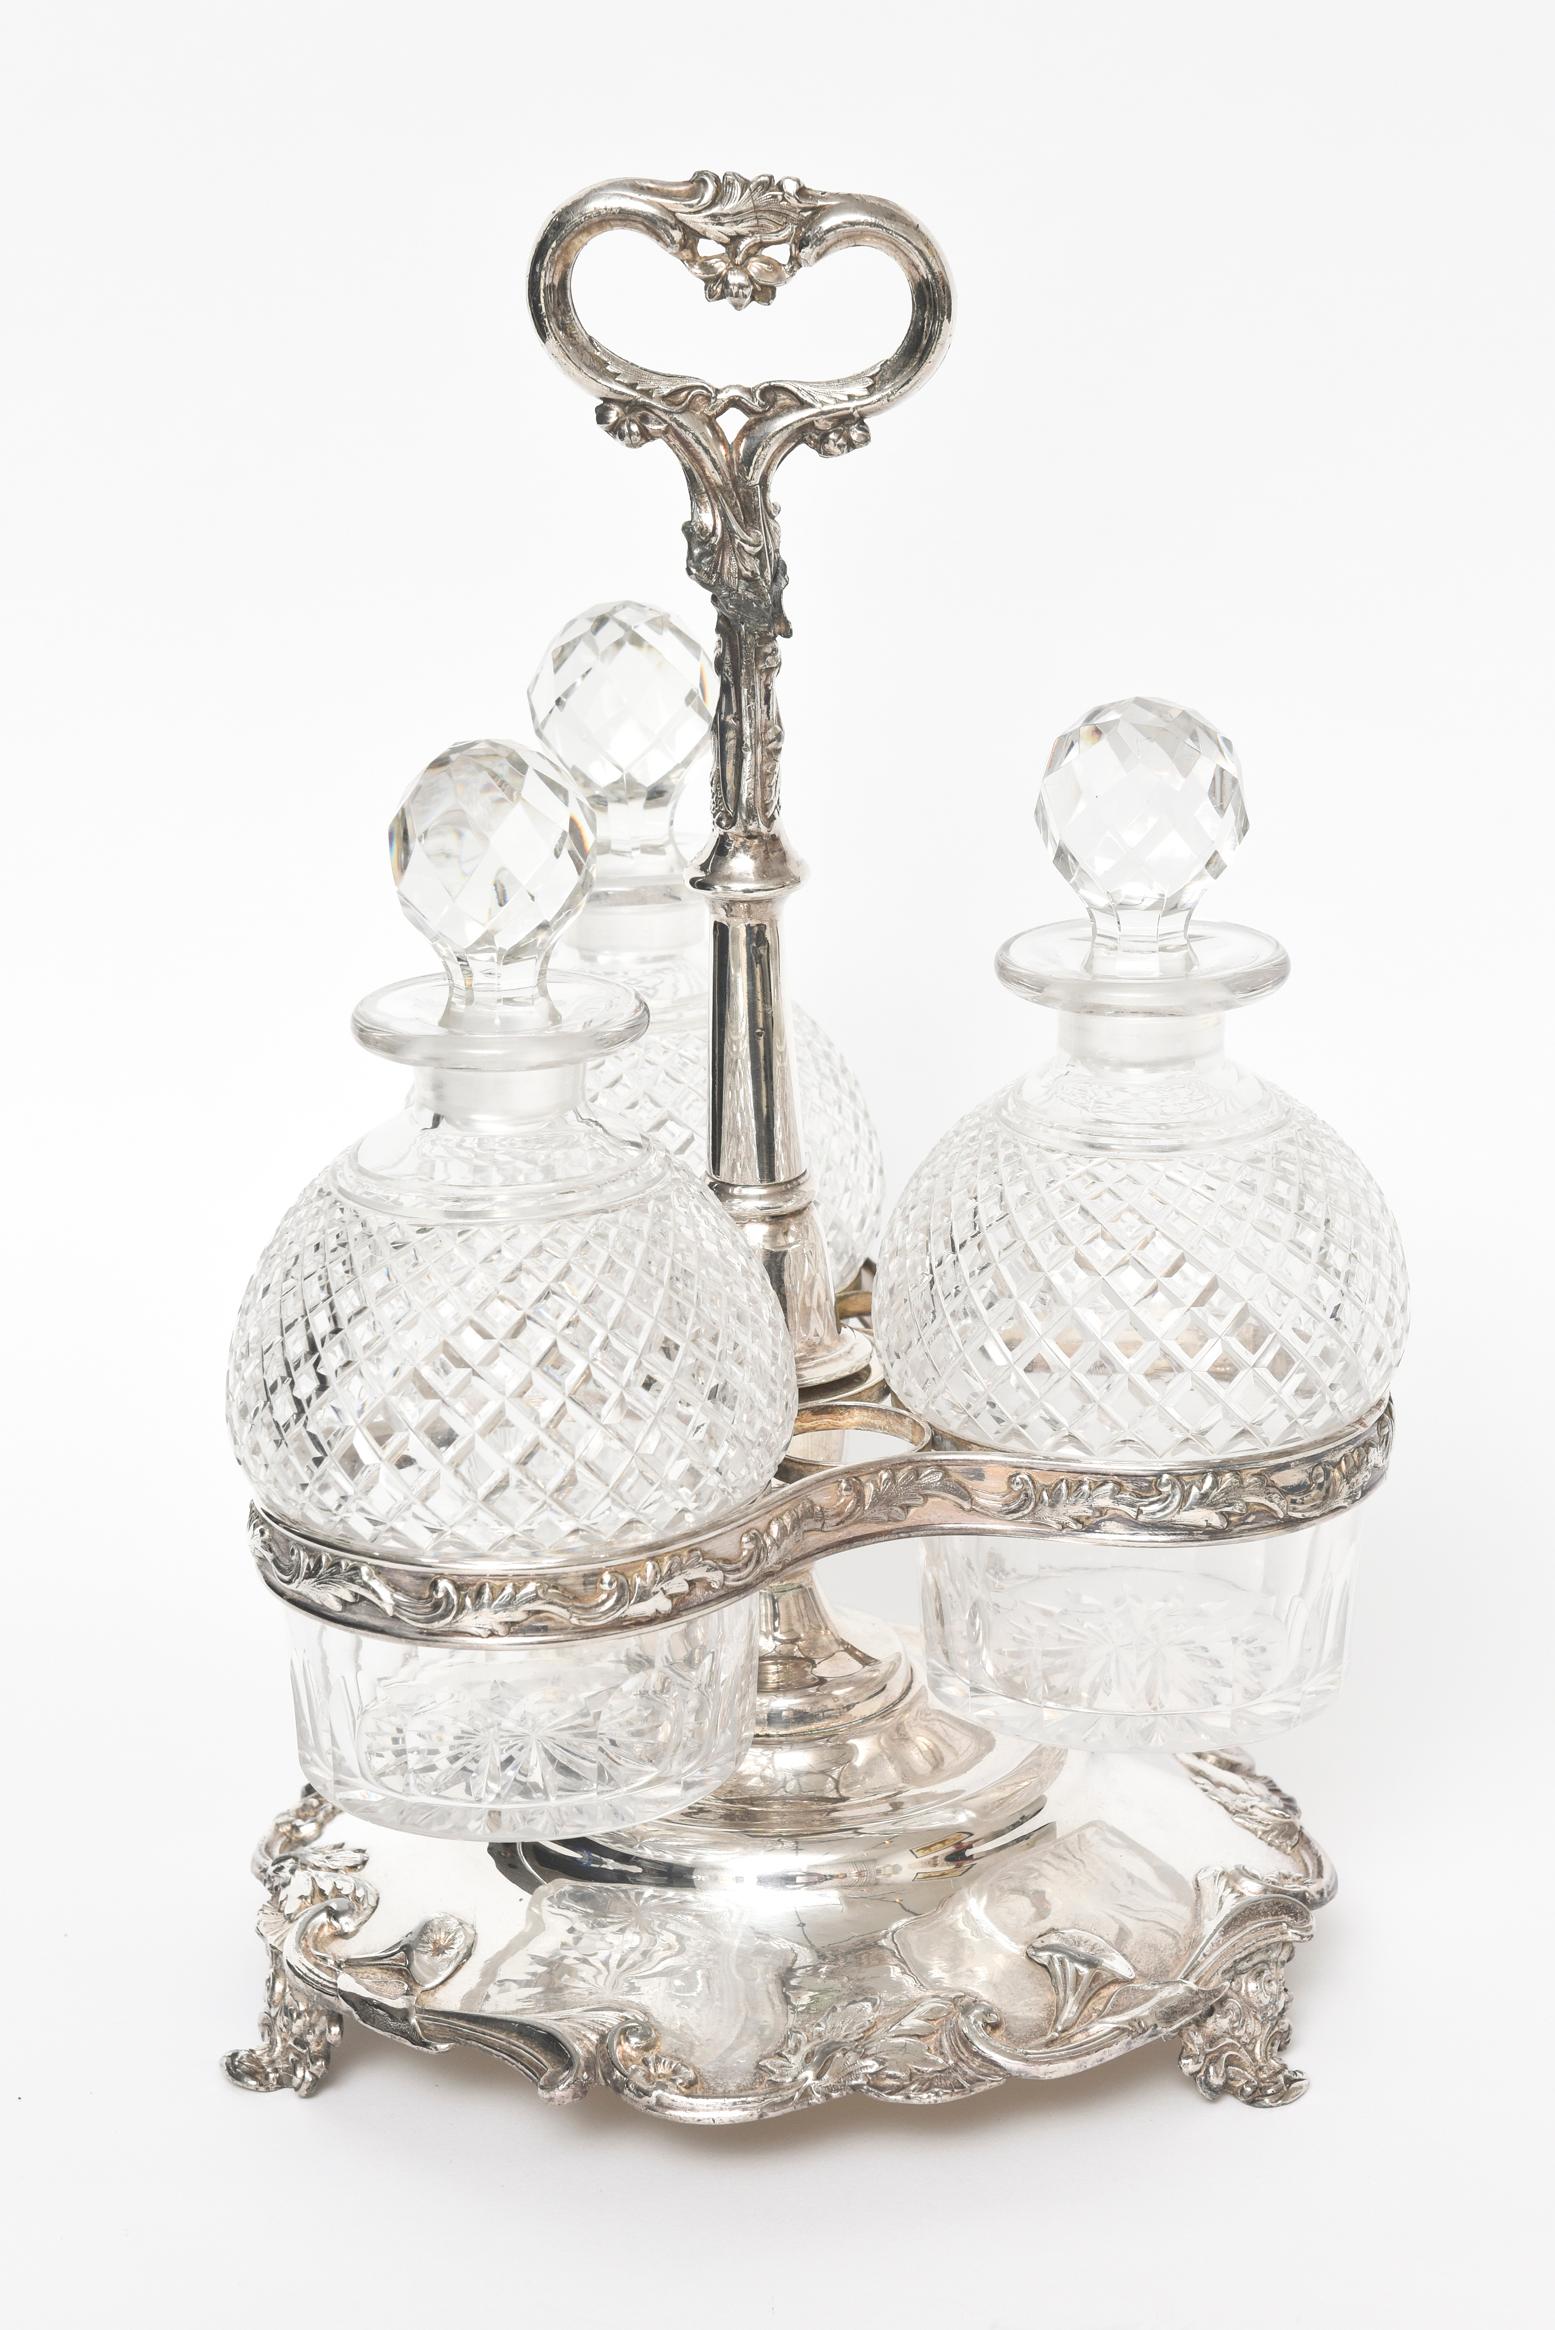 Ornate floral silver plate tantalus set featuring 3 cut glass bottles with a stand that comes apart into 3 pieces for easy storage. The stand has 3 feet so that it stands proudly on a table. The bottles measure approximately
7.5” x 4”.